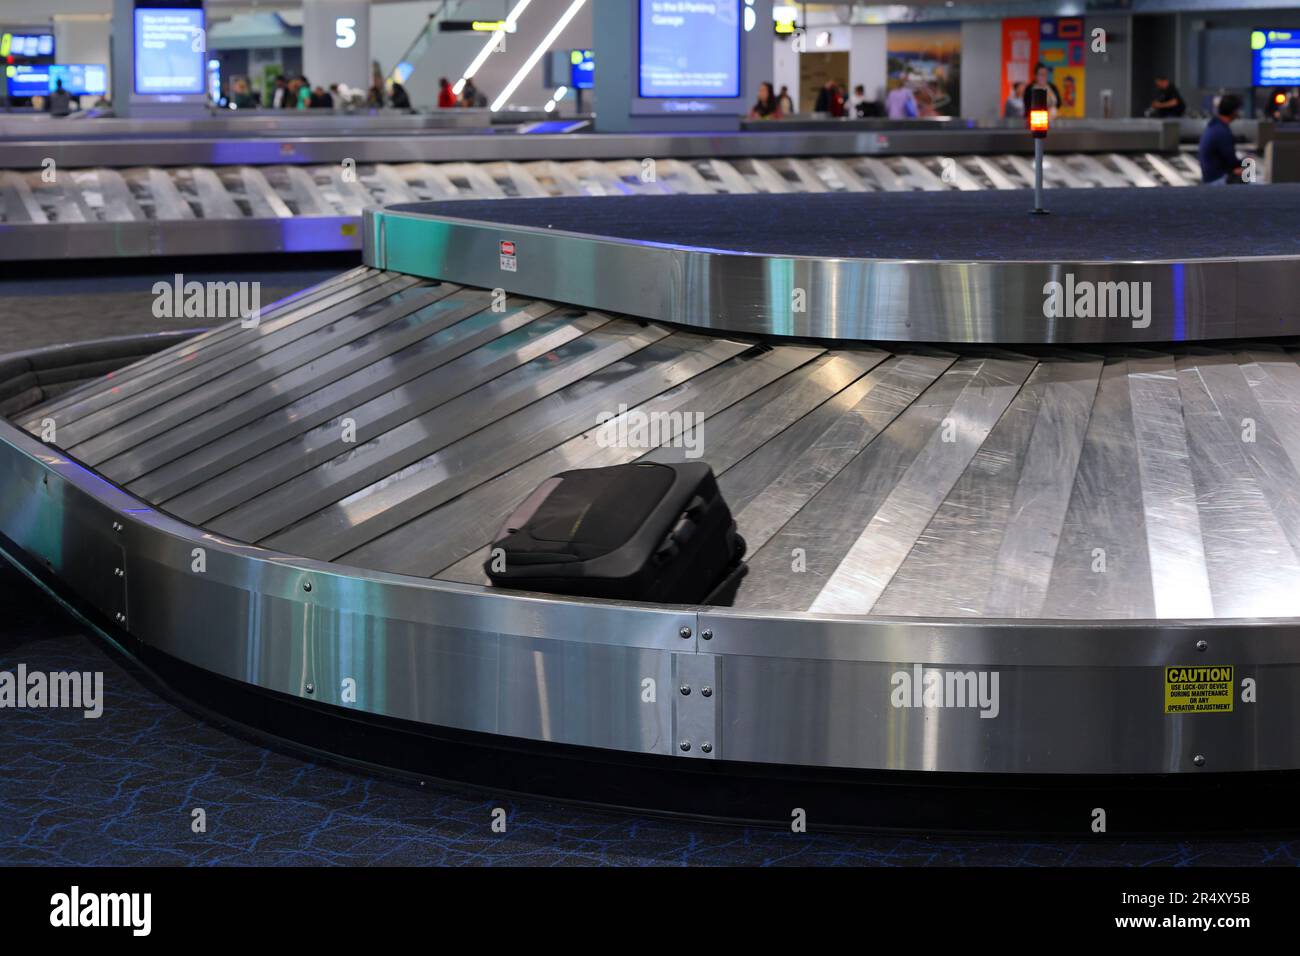 A suitcase on a luggage carousel at an airport arrivals baggage claim area. Stock Photo